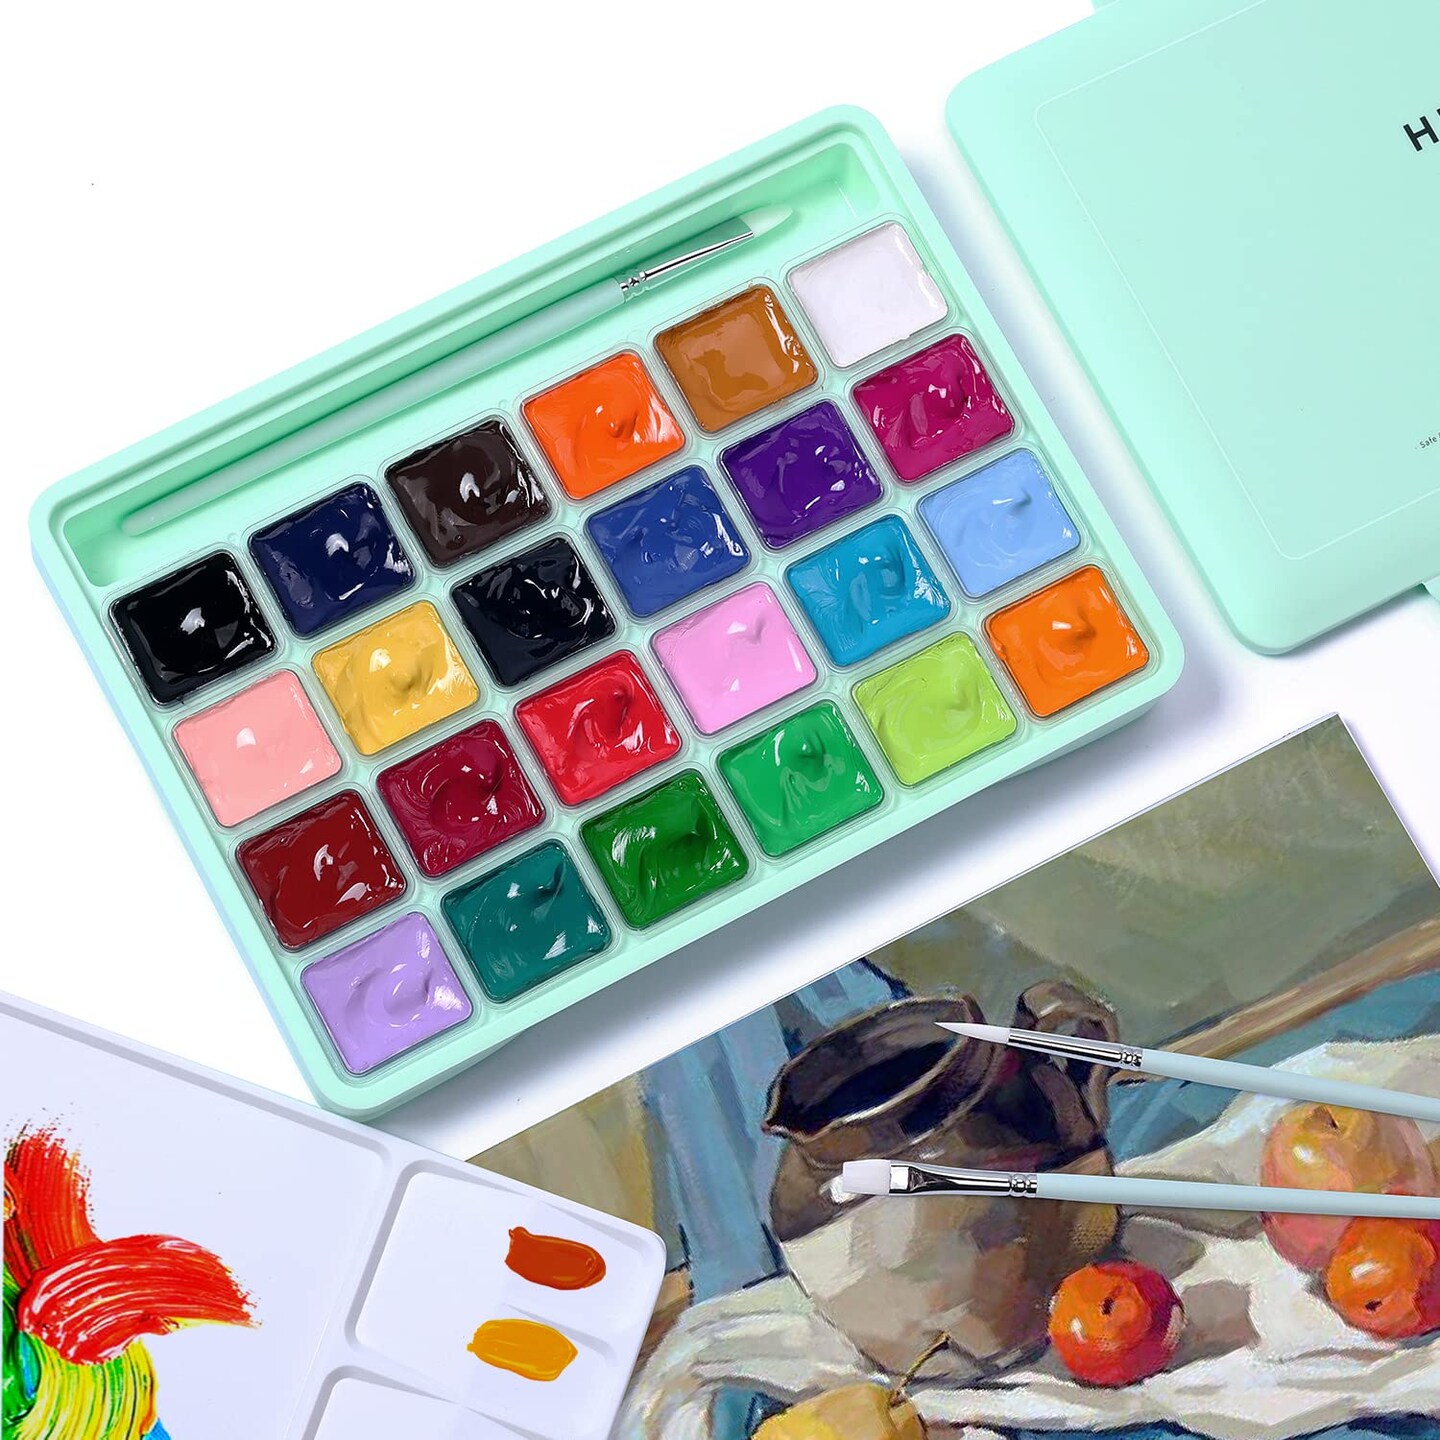 ABEIER Himi Gouache Paint Set, 24 Colors x 30ml Unique Jelly Cup Design with 3 Paint Brushes in A Carrying Case Perfect for Artists, St